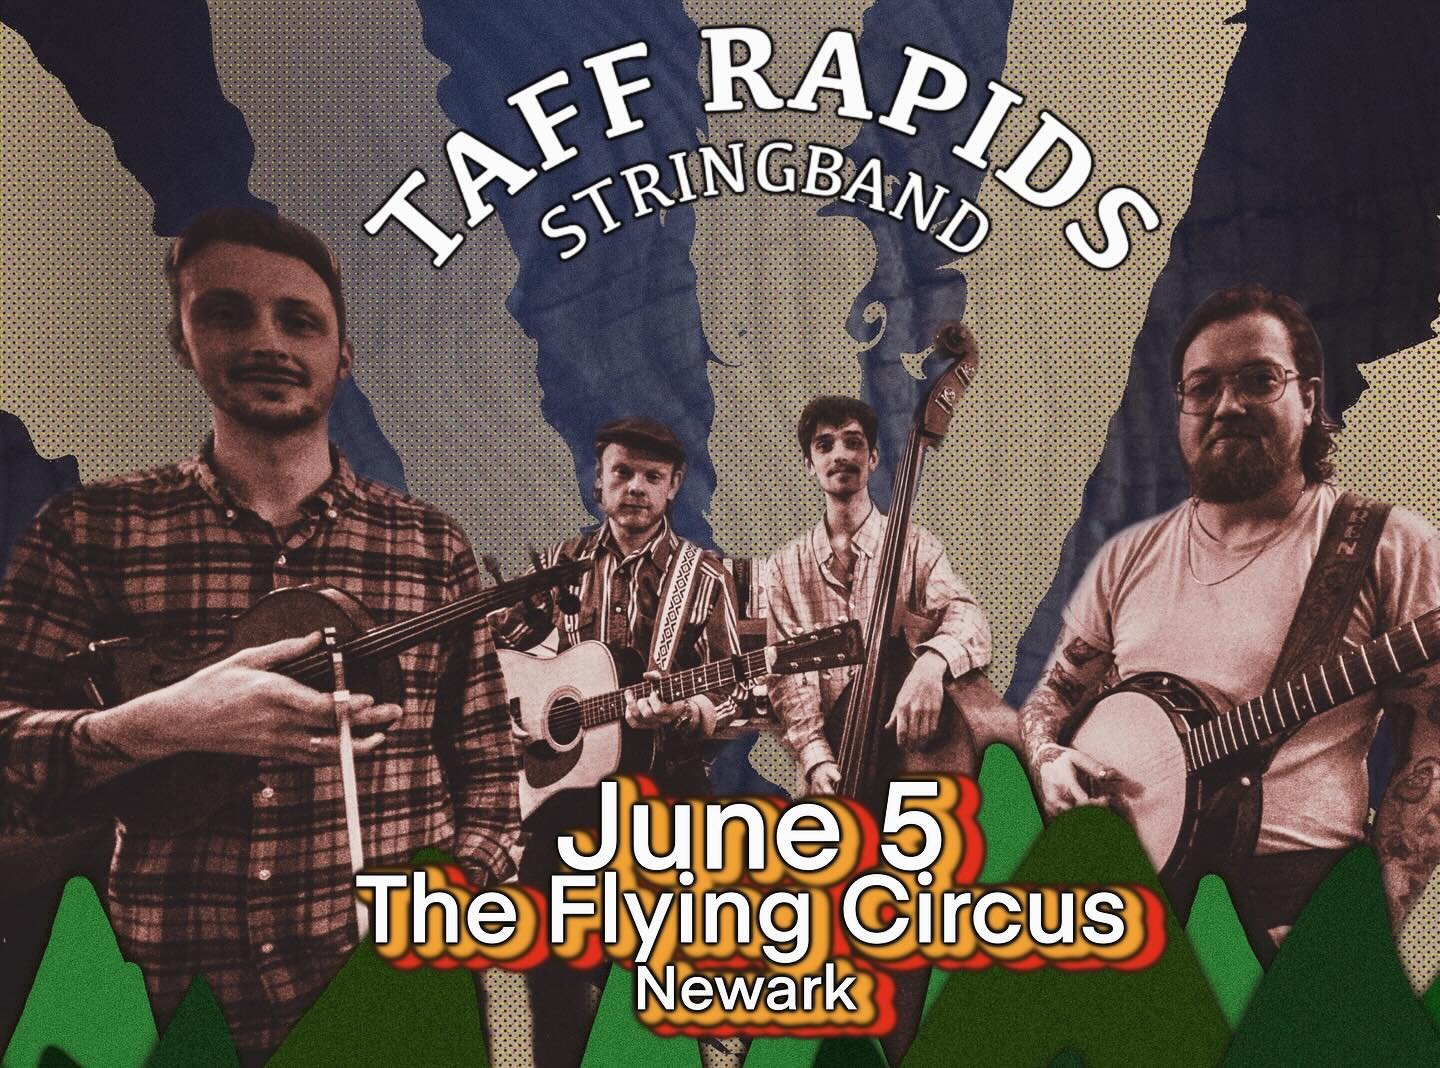 Hey Newark! What&rsquo;s good?! It&rsquo;s going to be our first time coming to play for you, and we&rsquo;d love to hang! 

We&rsquo;ve got a nice early one on at the Flying Circus on June 5th!

6pm start
@theflyingcircusnewark 

#blŵgras